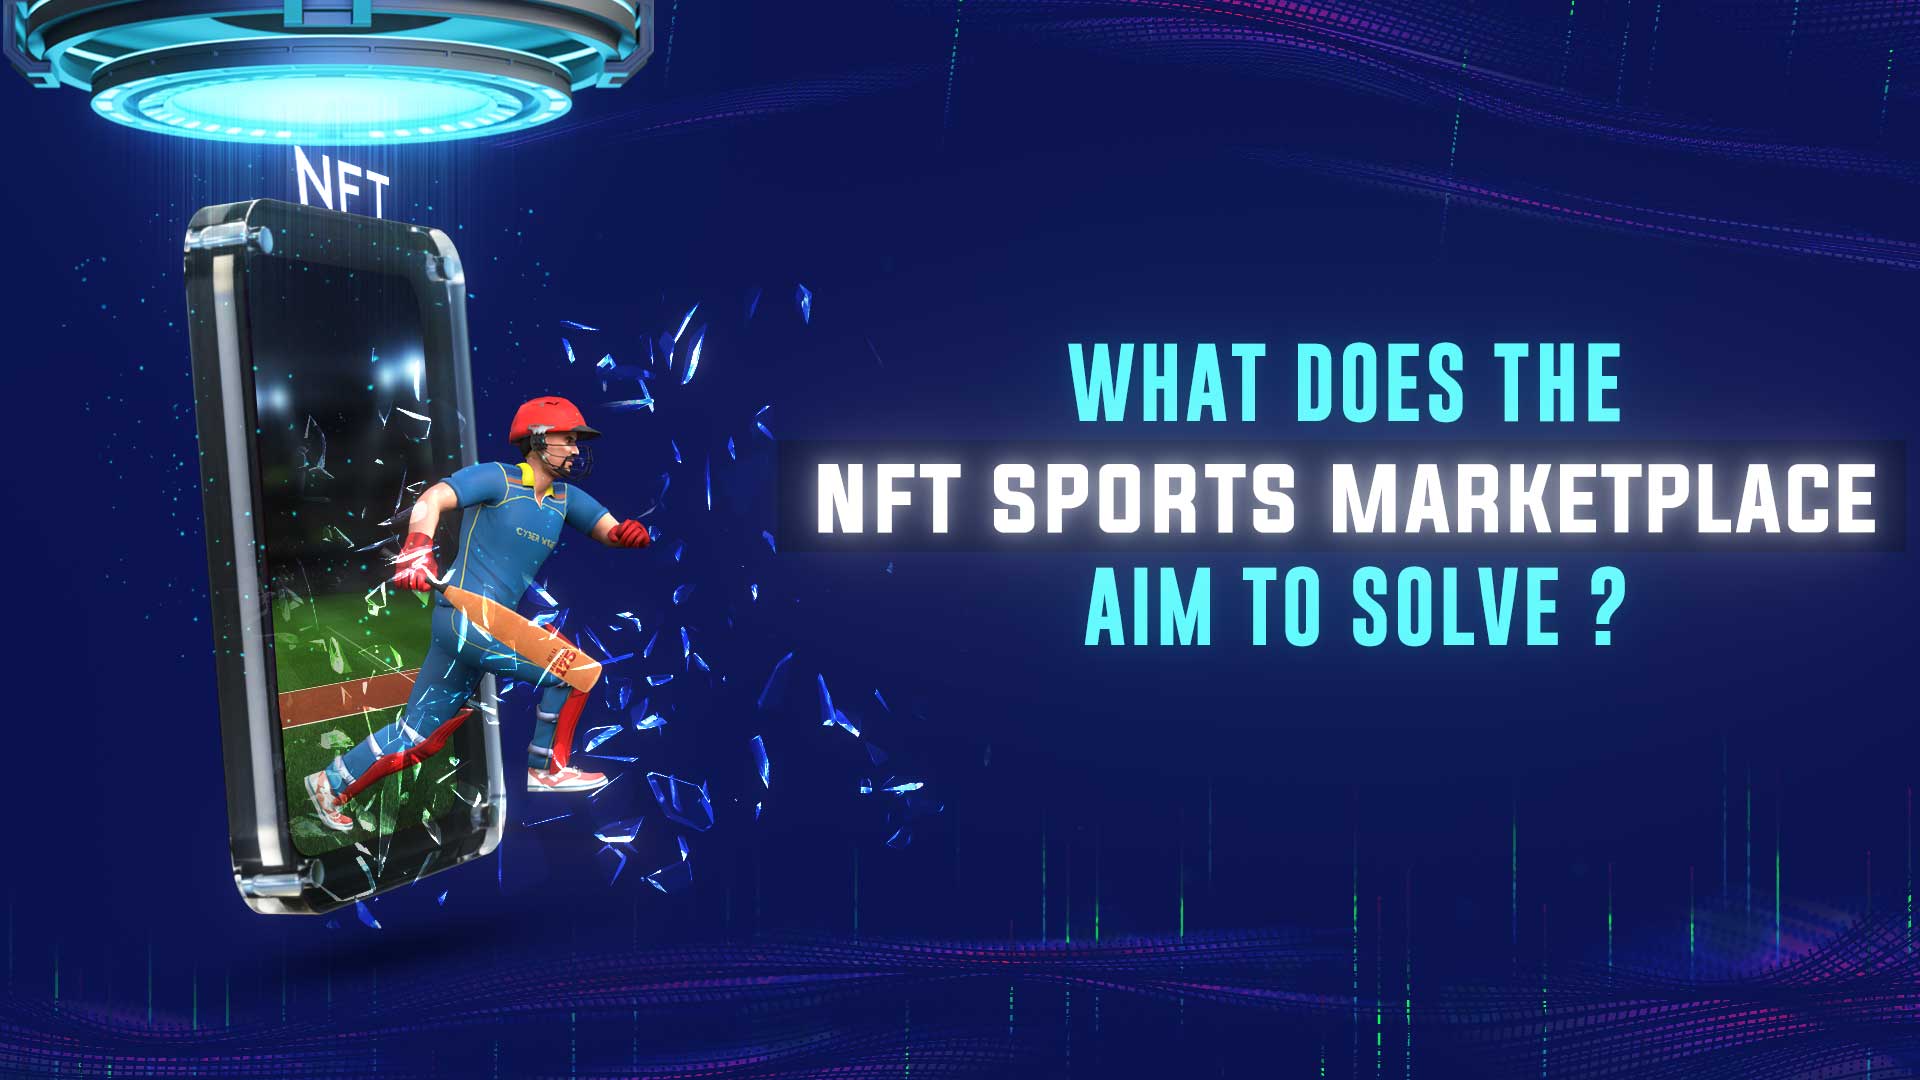 What Does The NFT Sports Marketplace Aim To Solve?